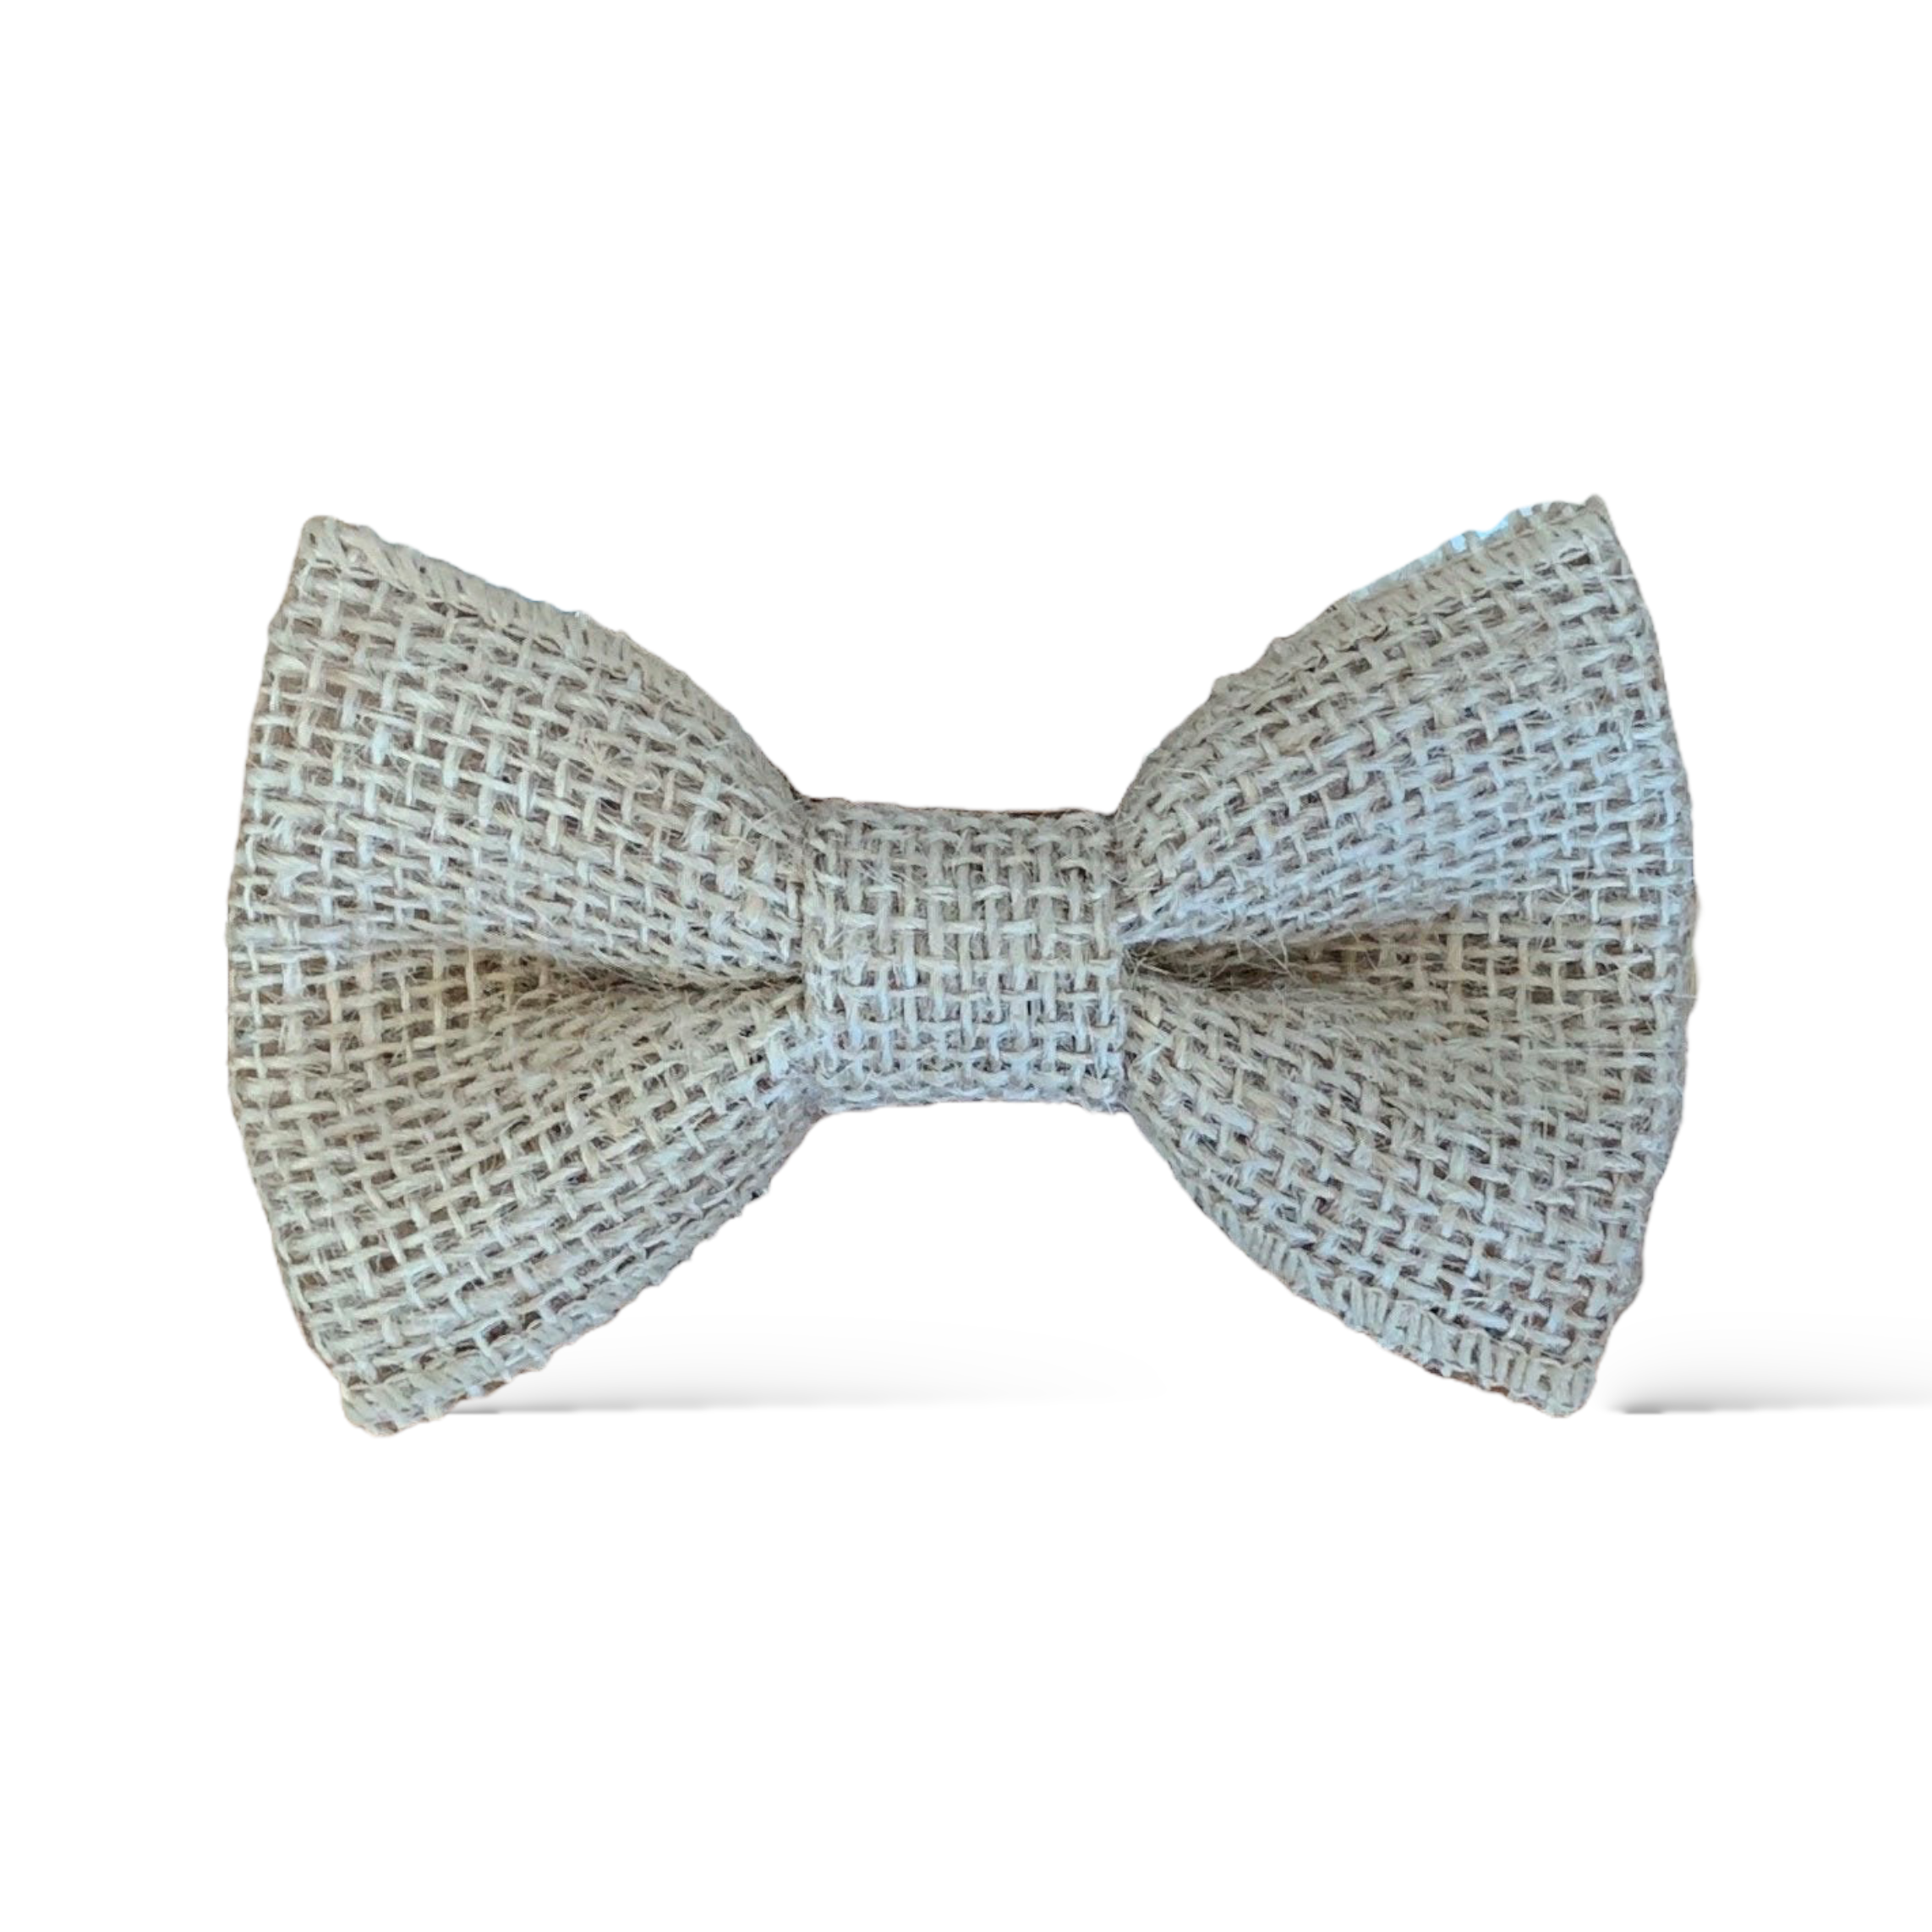 A country chic burlap bow tie for men and boys to wear to a cowboy wedding.